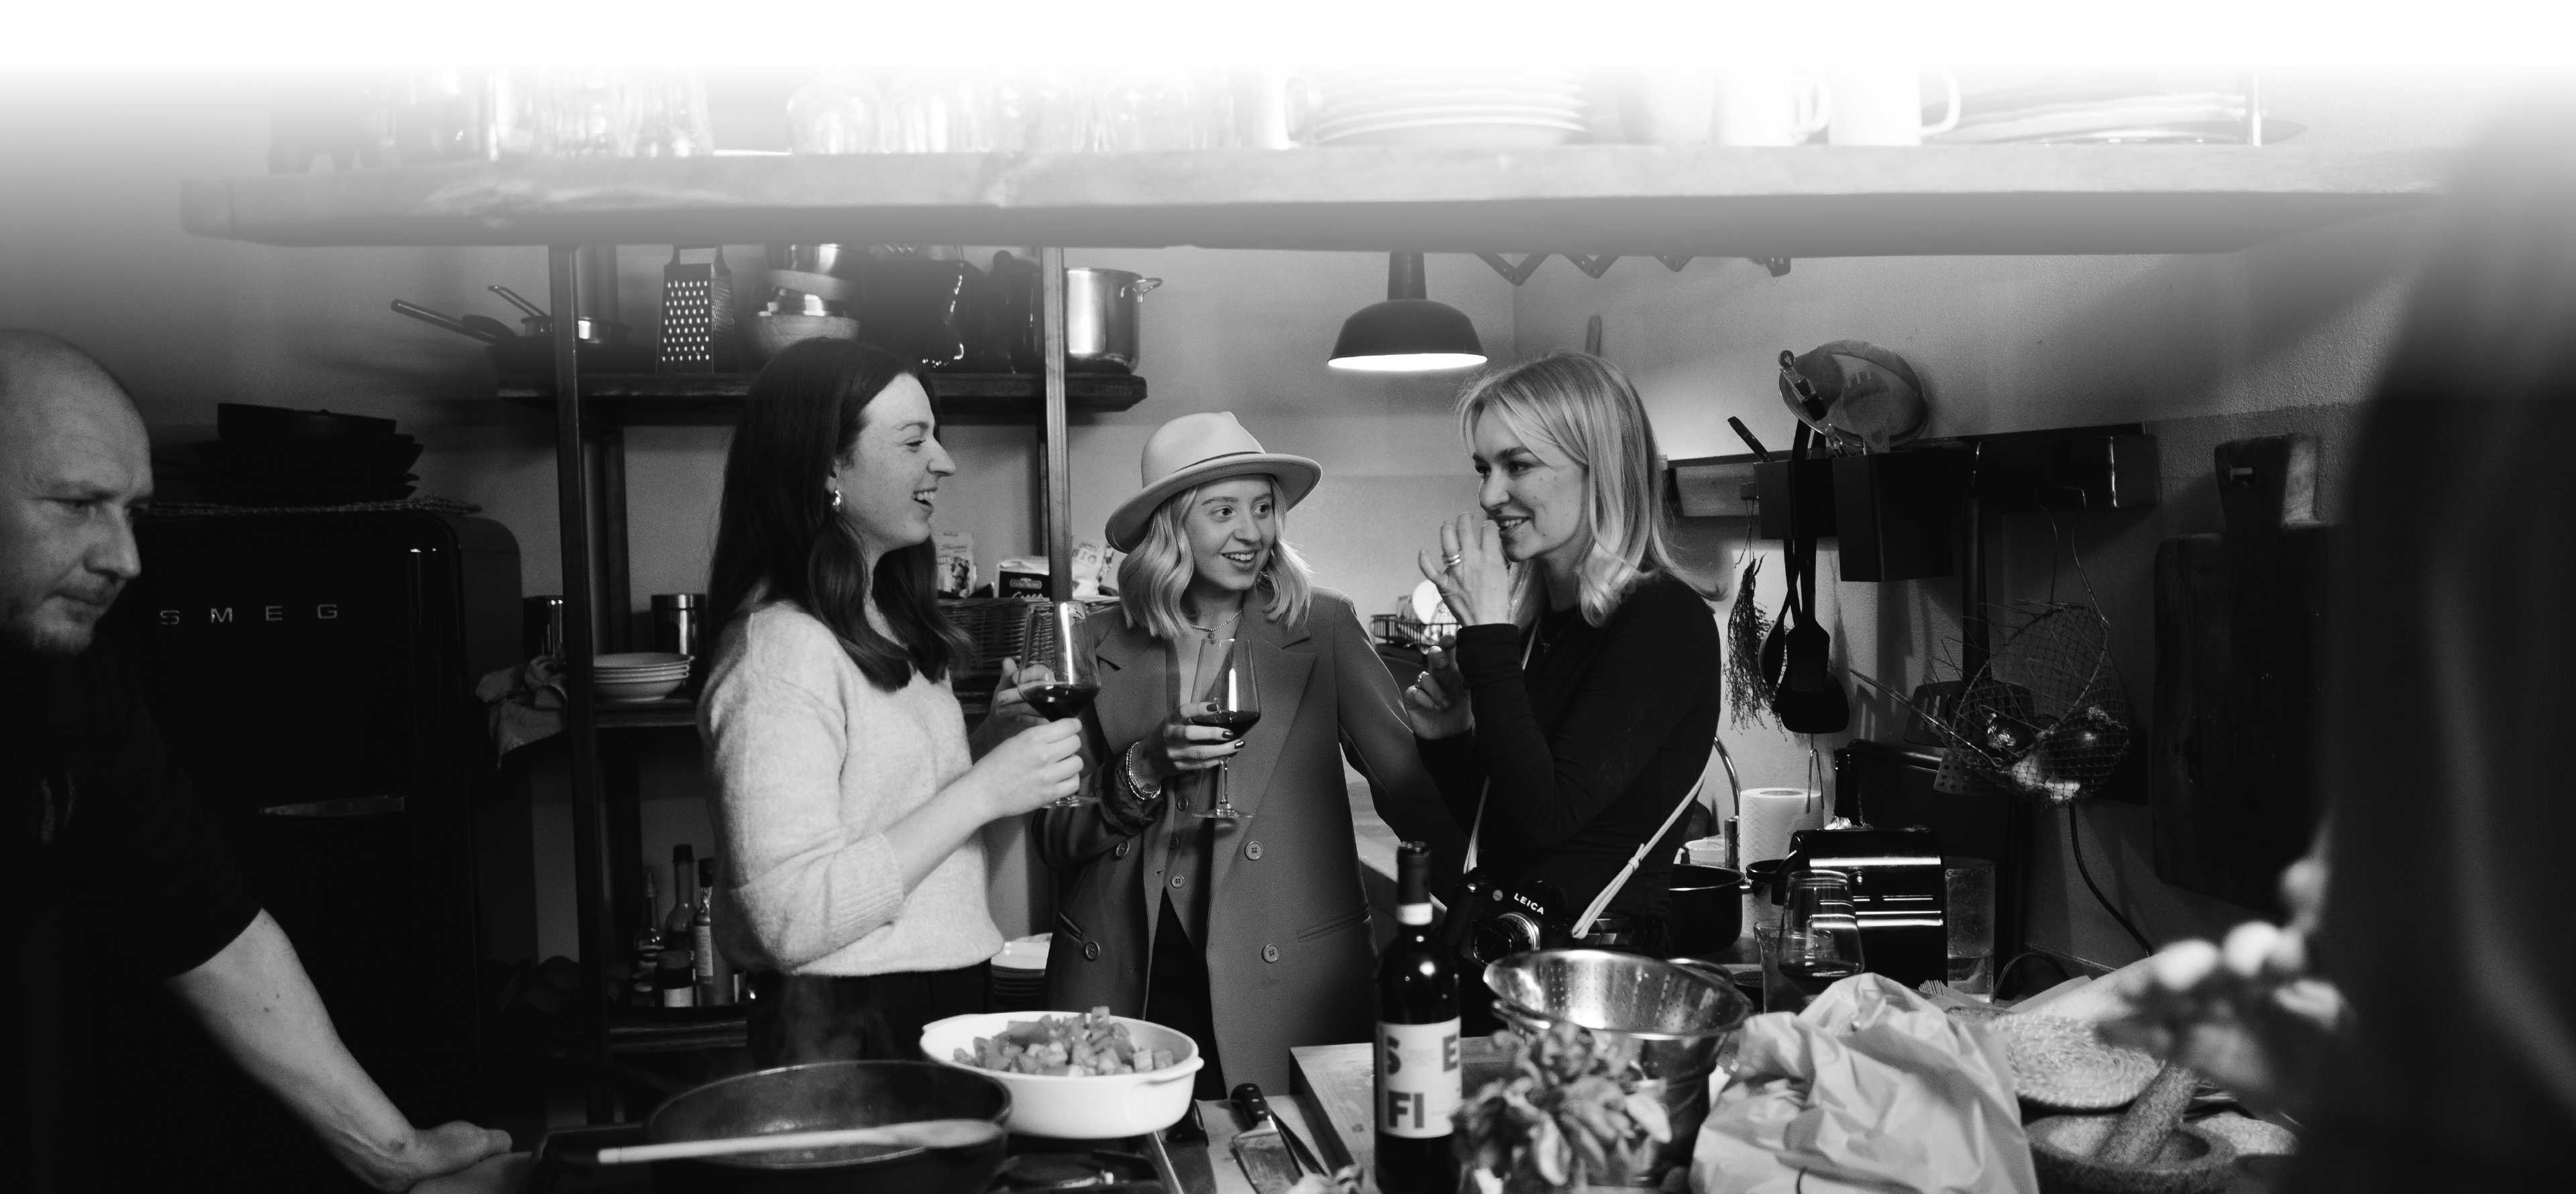 Three women with a wine glass in their hands stand in a kitchen